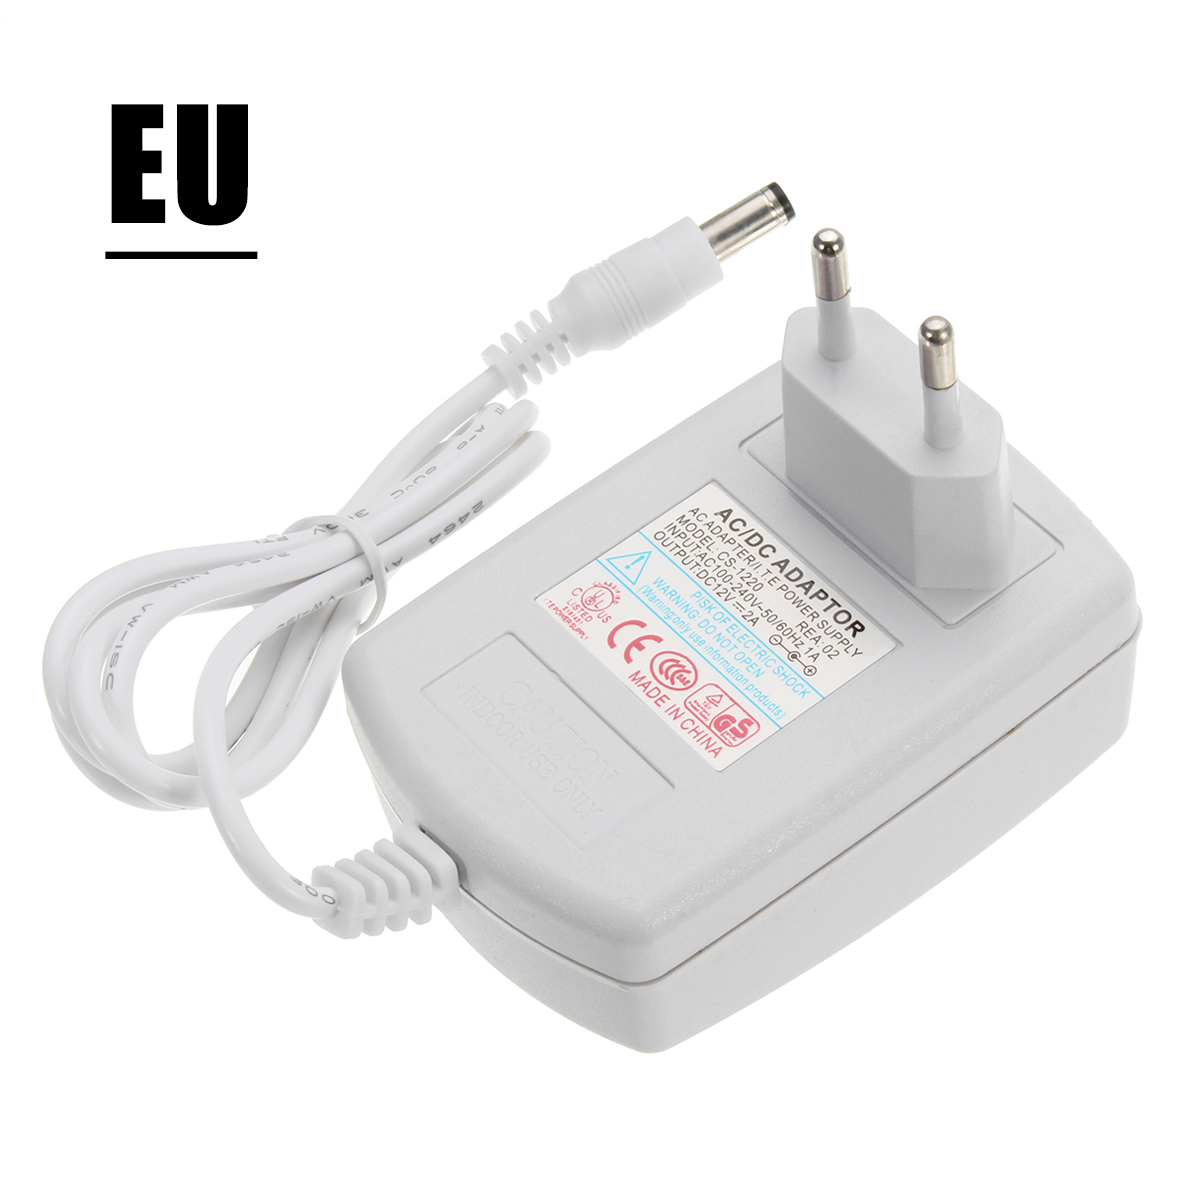 Power-Supply-Charger-Adapter-EU-Plug-for-Hollywood-Style-LED-Vanity-Mirror-Light-Bulbs-1309323-3